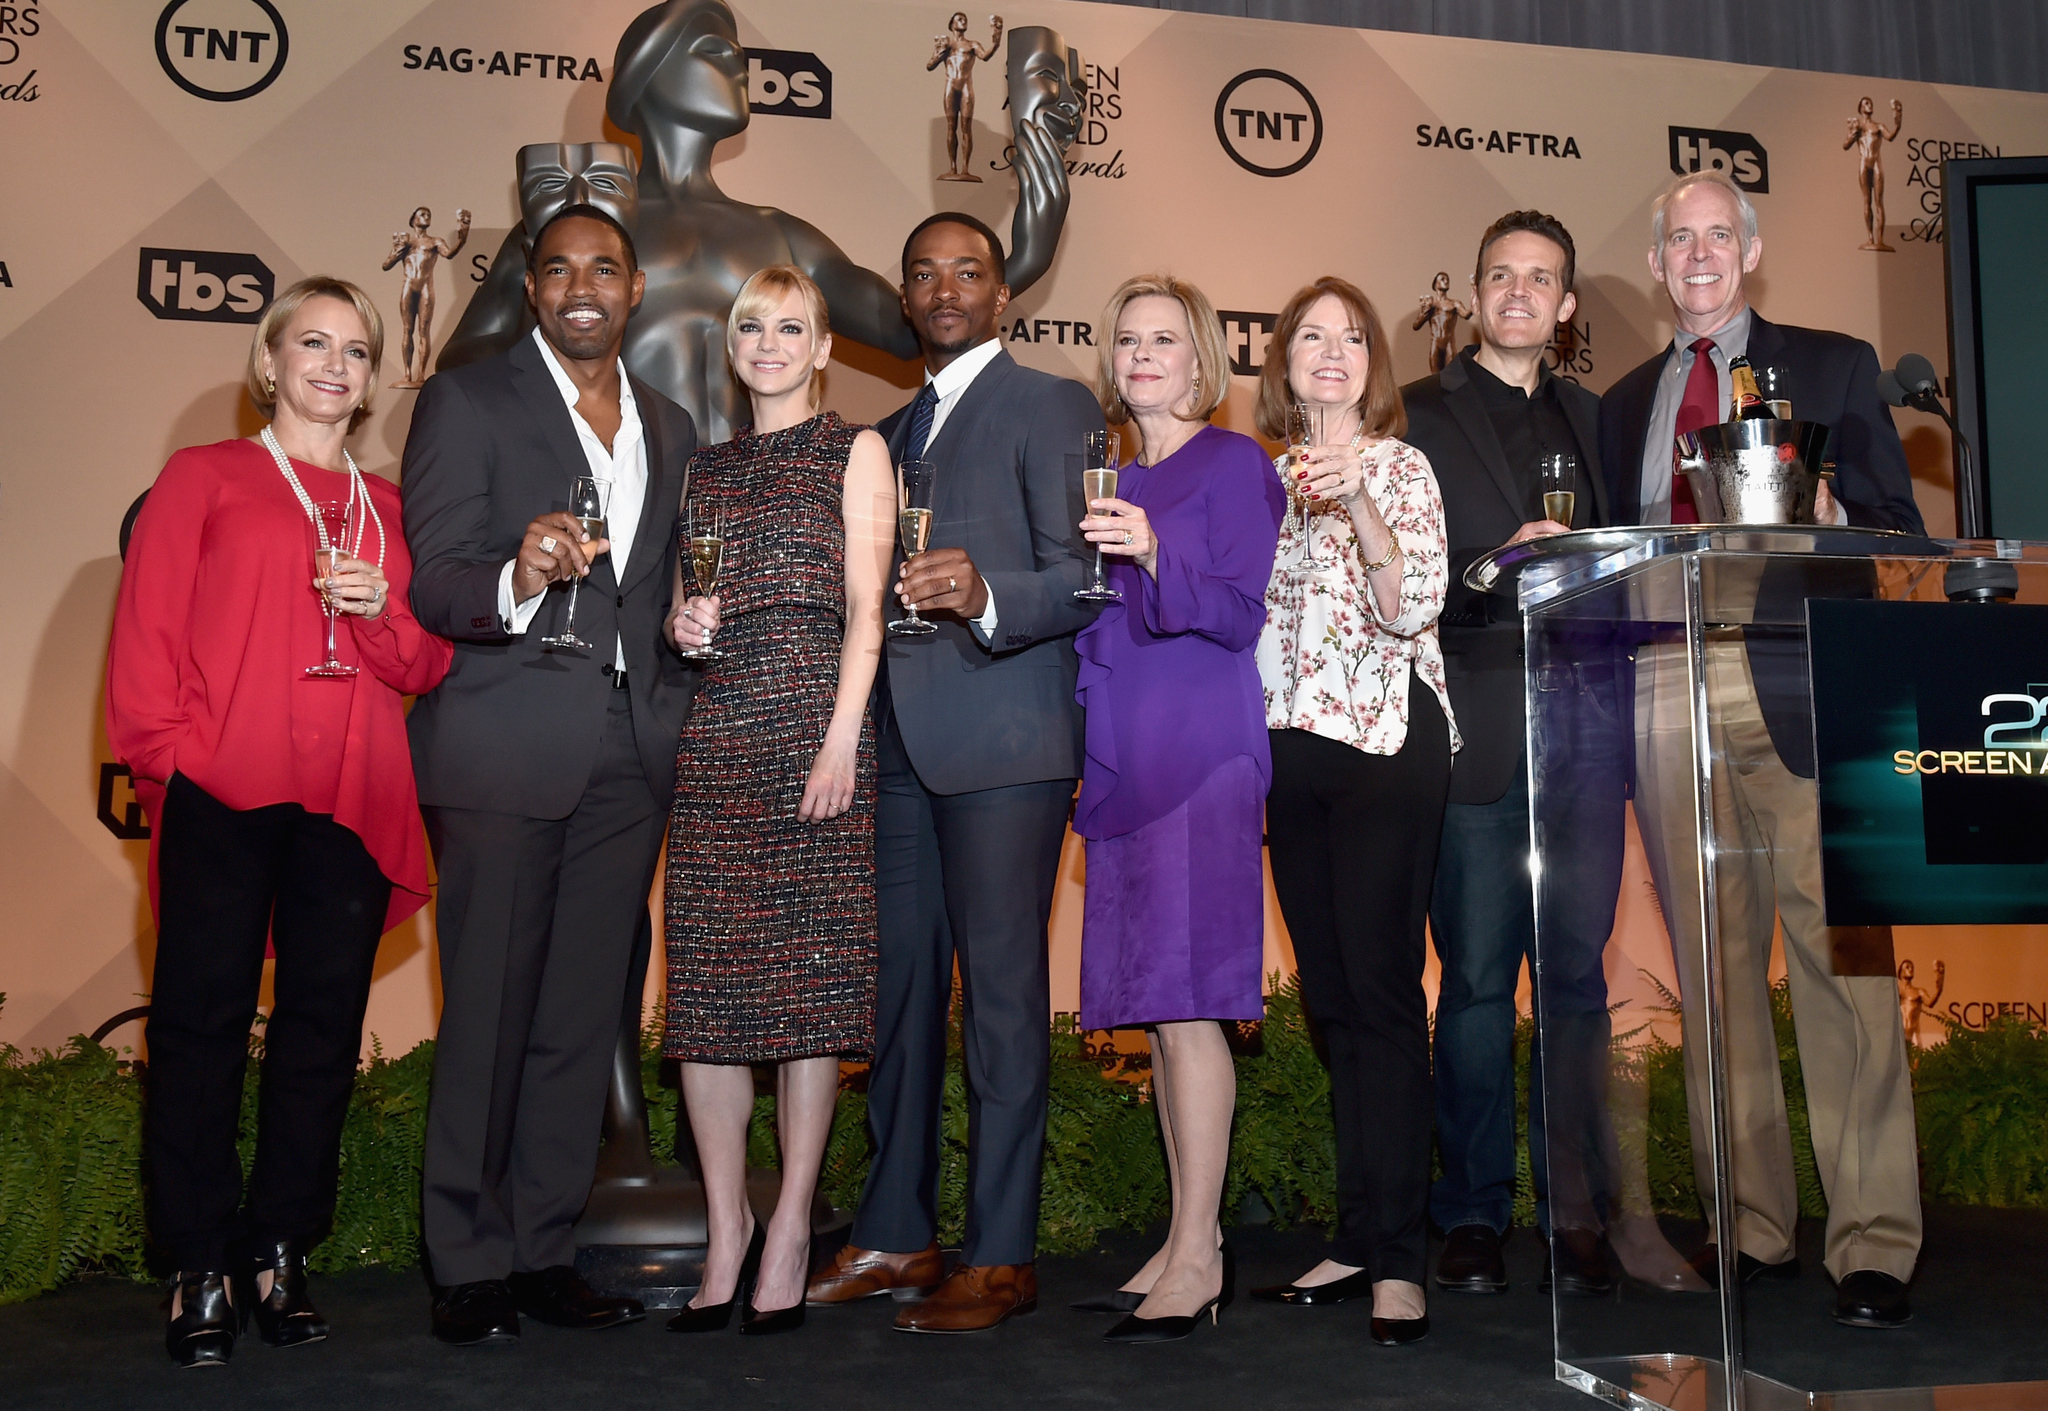 JoBeth Williams, Daryl Anderson, Gabrielle Carteris, Kathy Connell, Anna Faris and Anthony Mackie